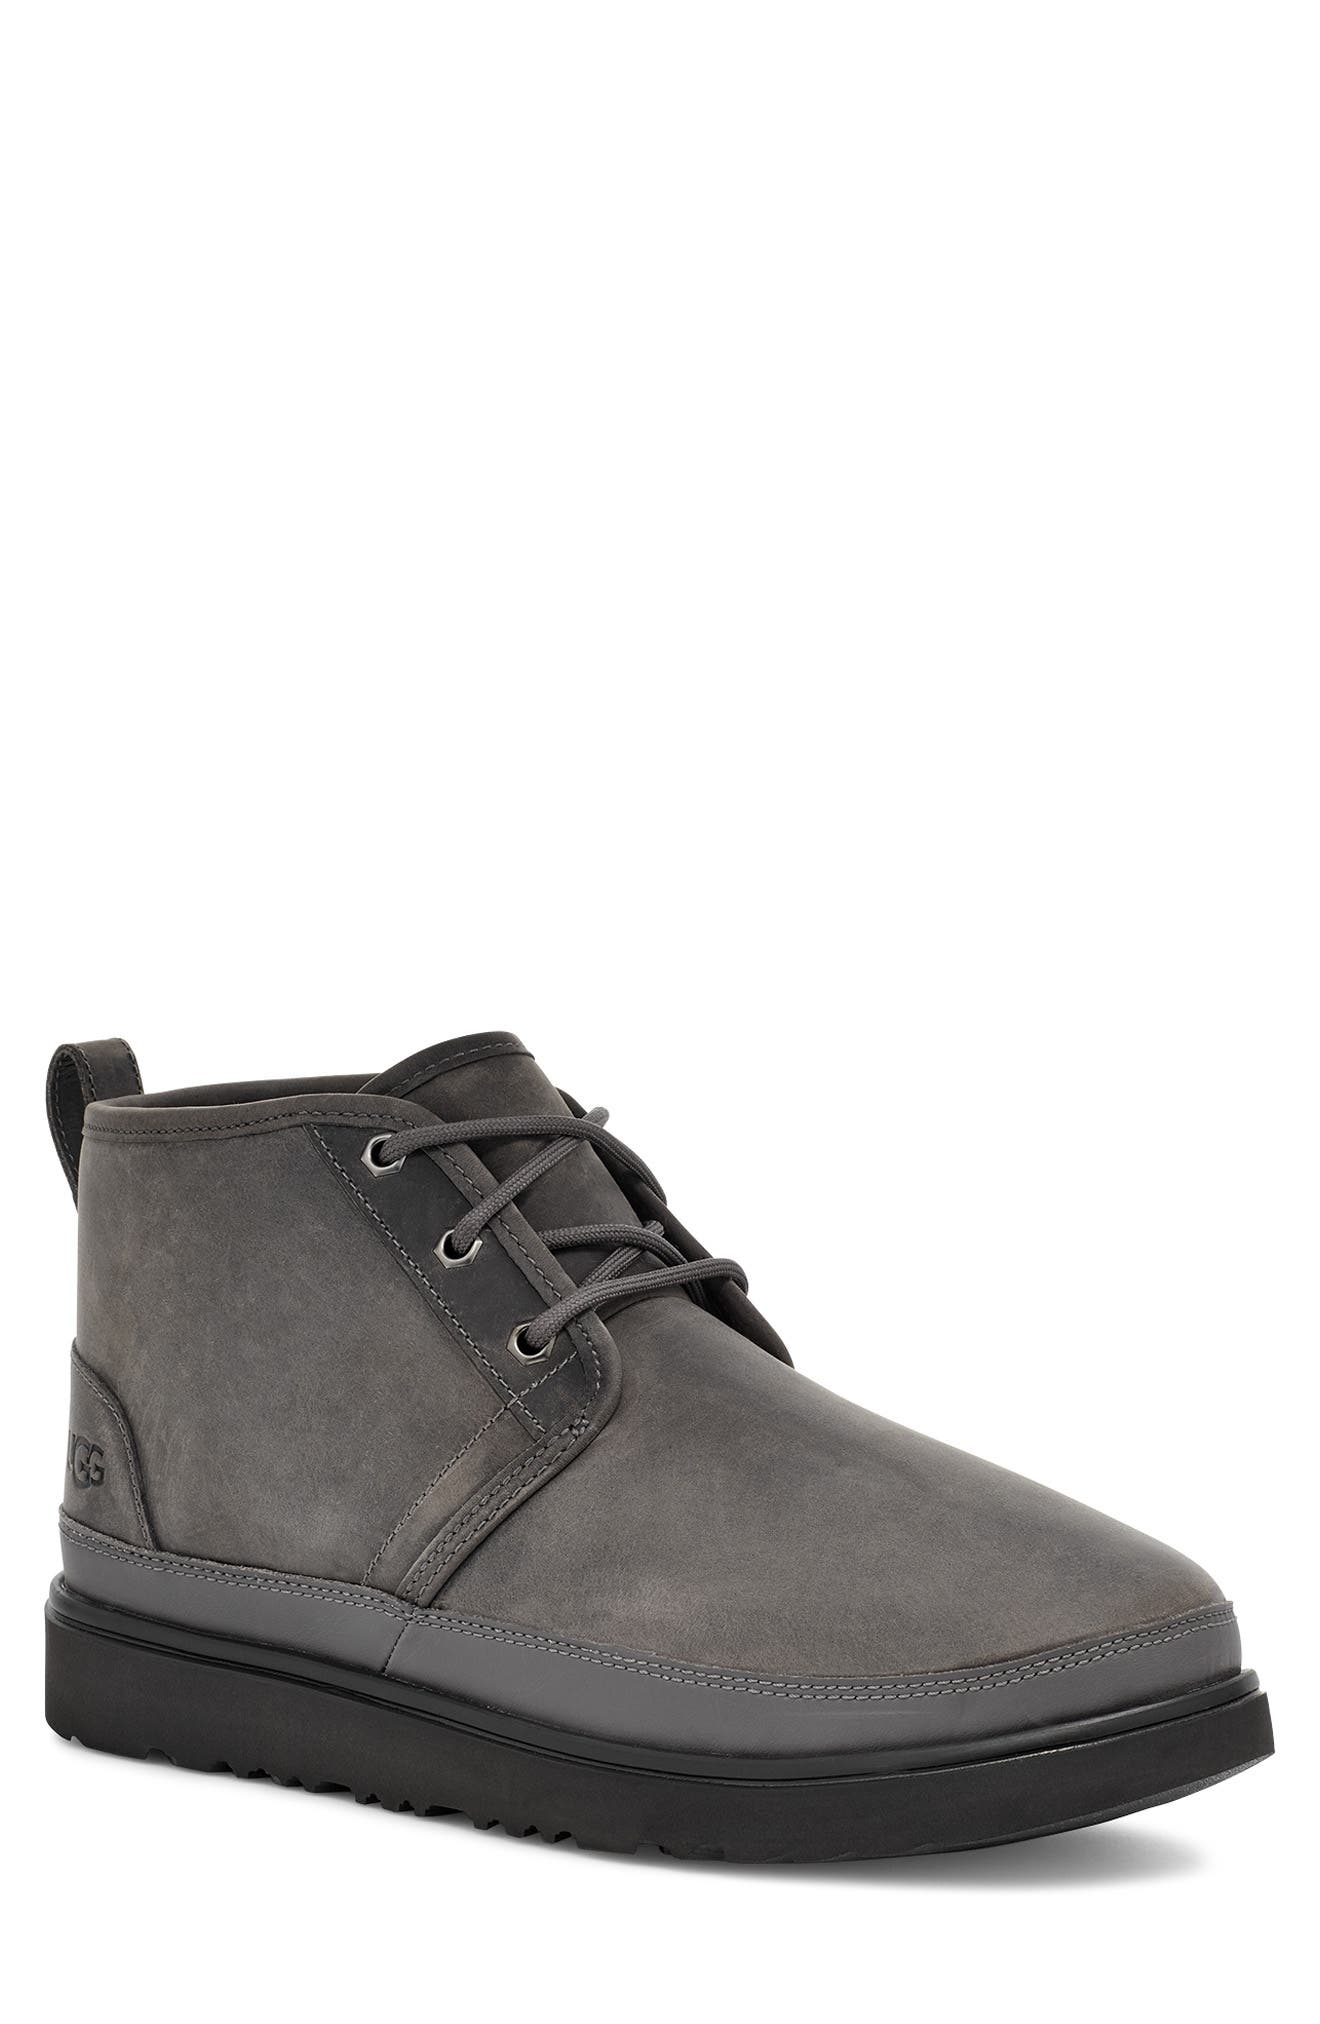 uggs mens shoes